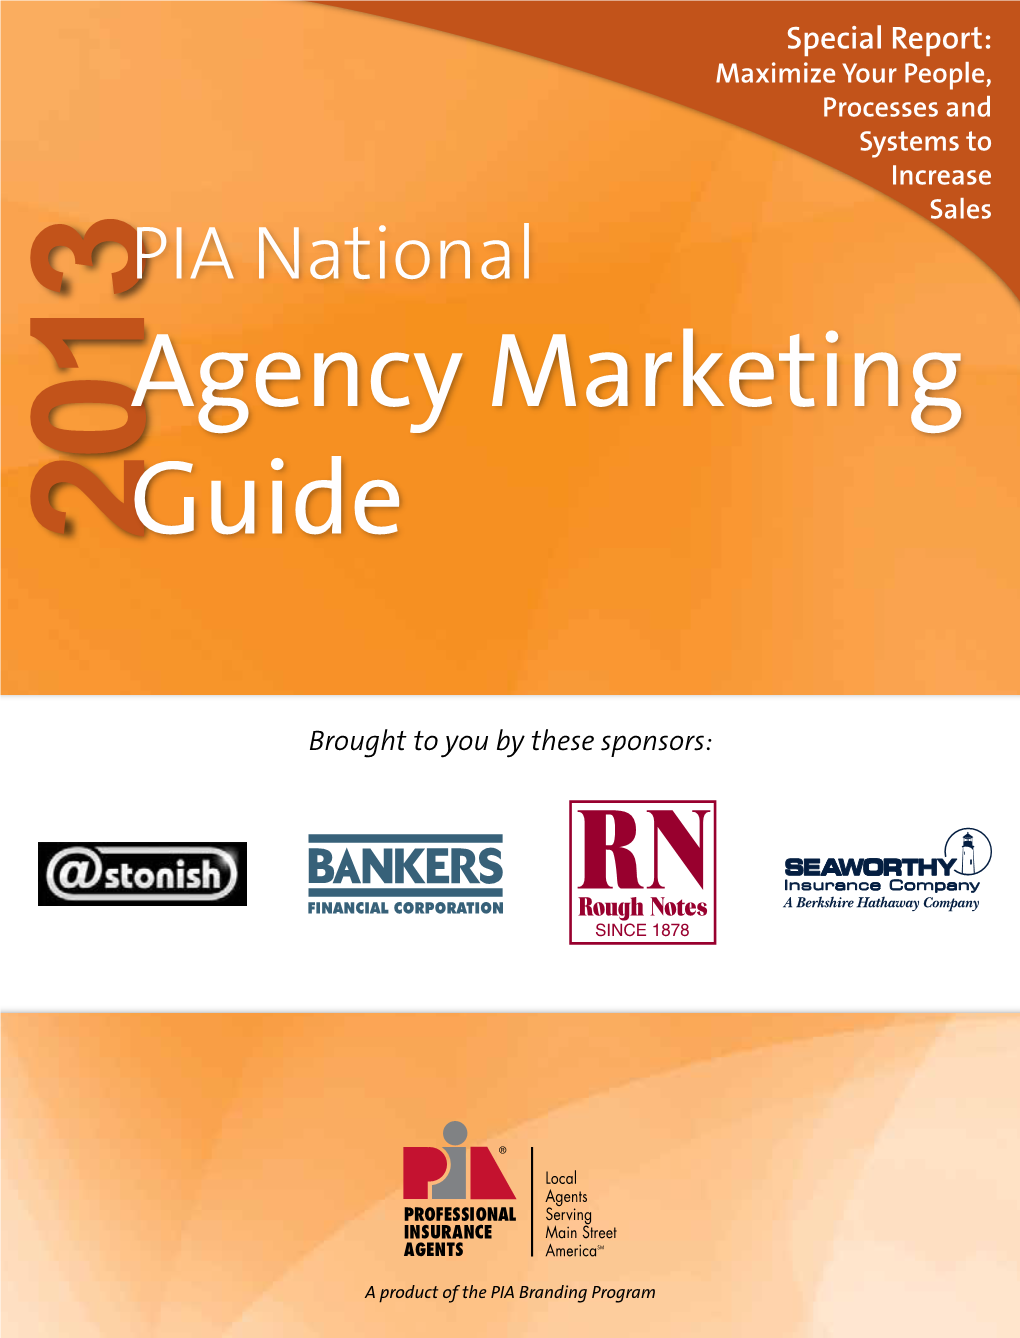 2013 PIA National Agency Marketing Guide: Astonish, Bankers Financial Corporation, Rough Notes and Seaworthy Insurance Company